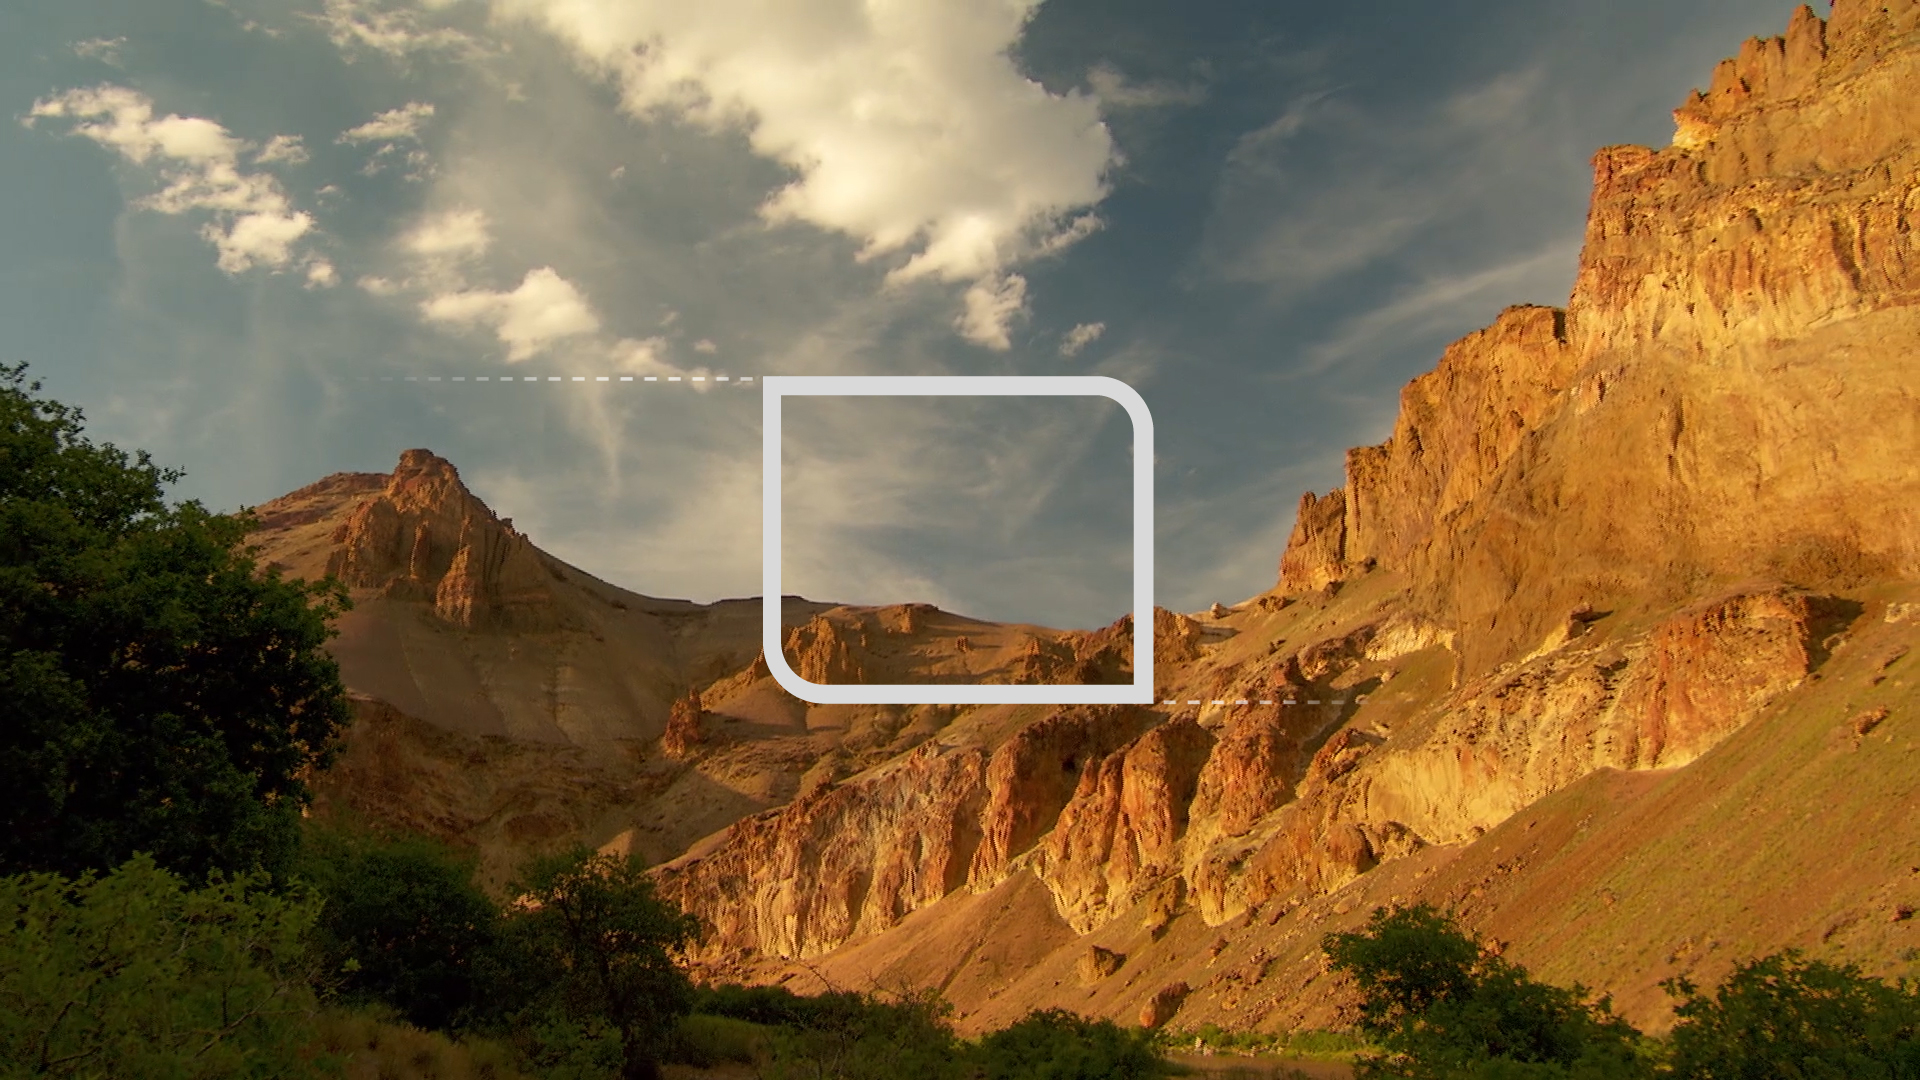 Animation of graphics for OPB's Oregon Field Guide logo overlaid on footage of sunlit cliff walls